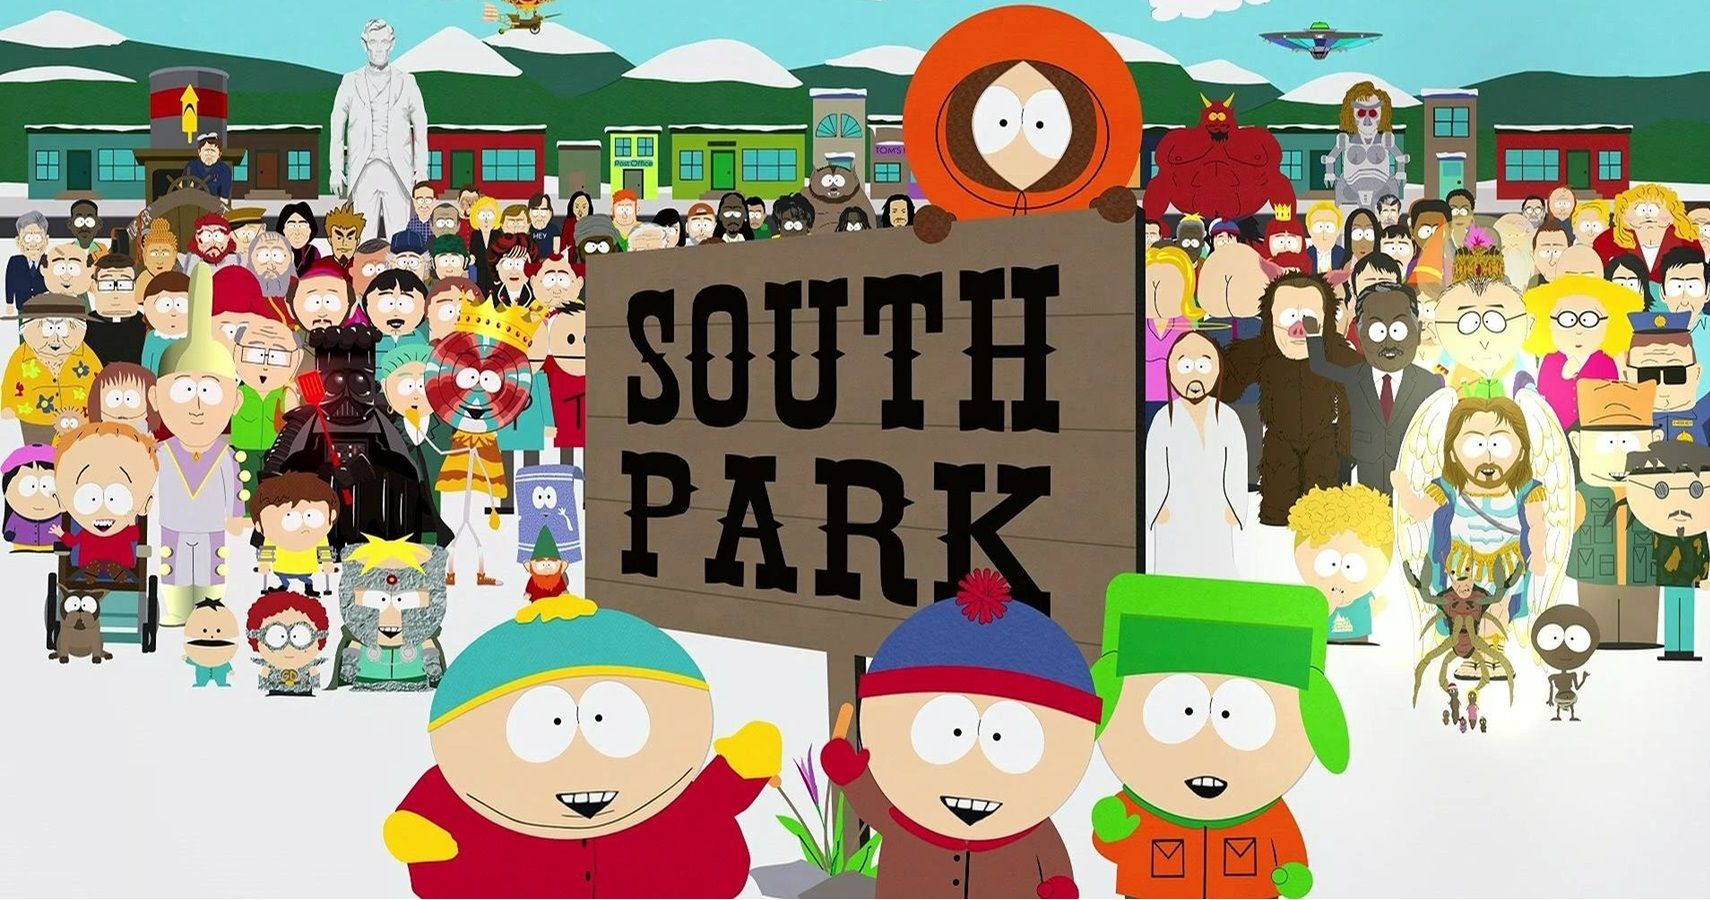 South Park The Most Memorable Scene From Each Of IMDbs 10 TopRated Episodes